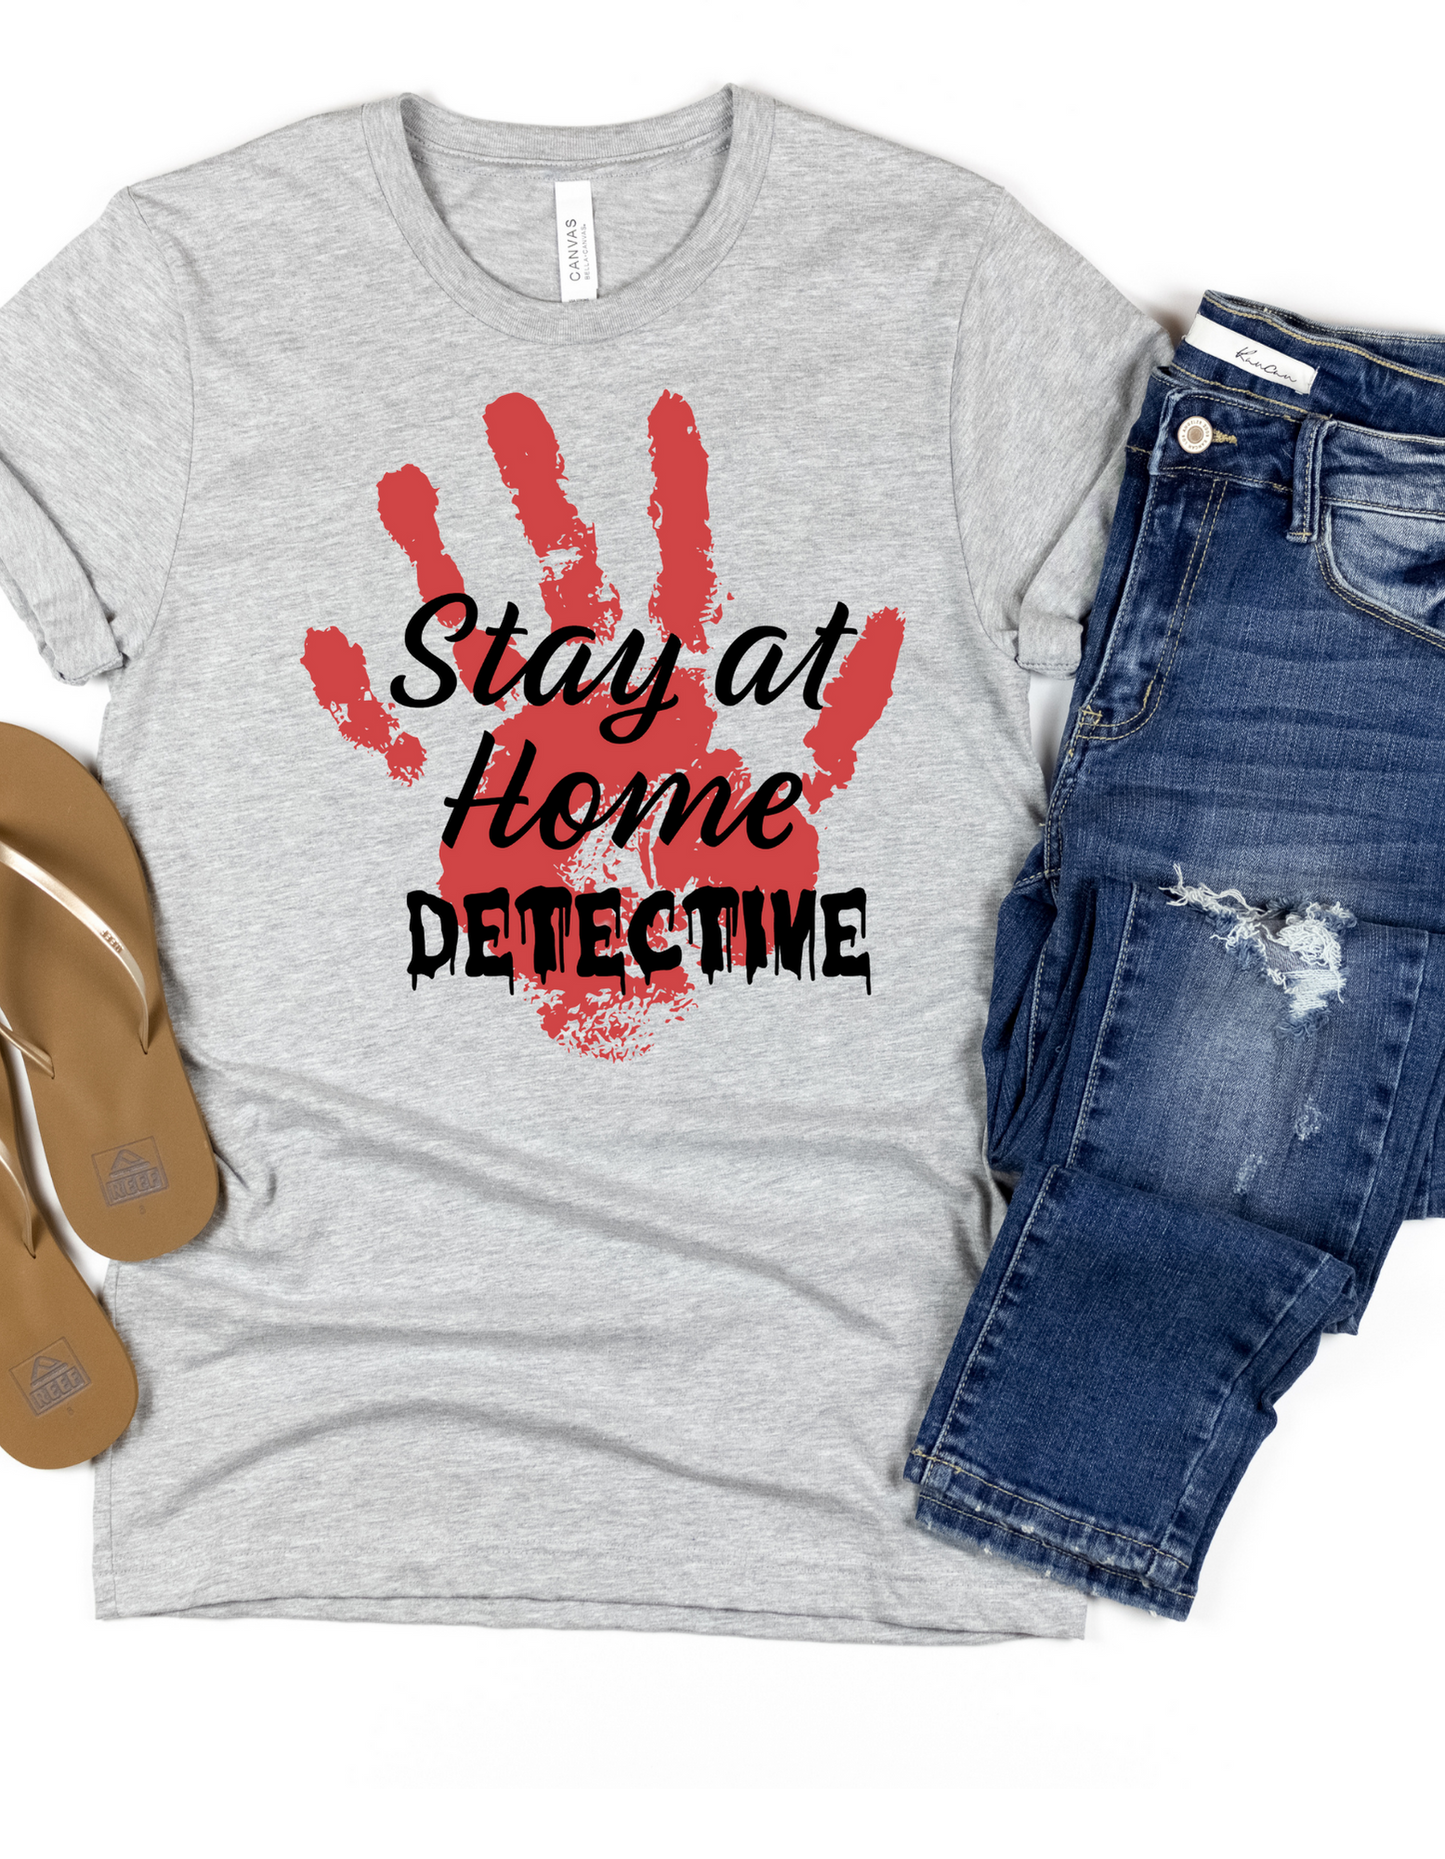 Stay at Home Detective TShirt